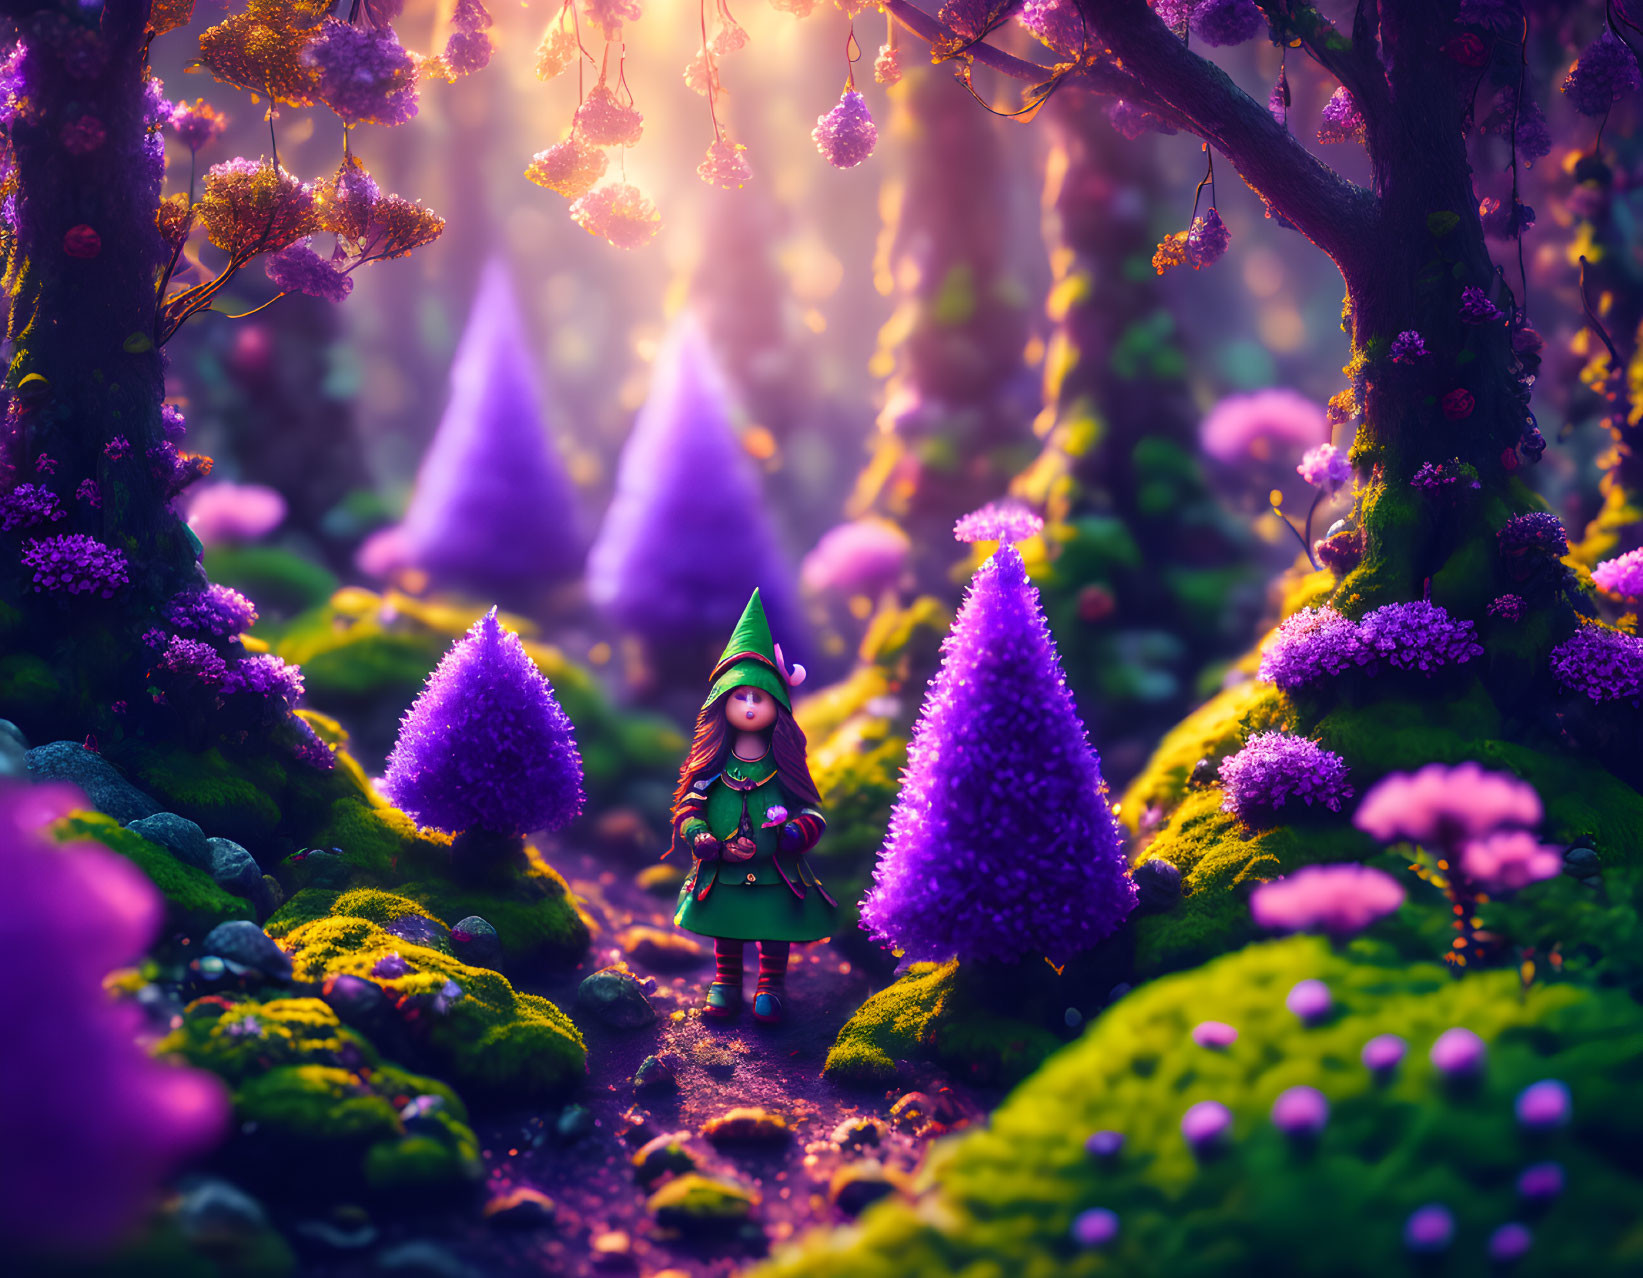 alone in the purple forest